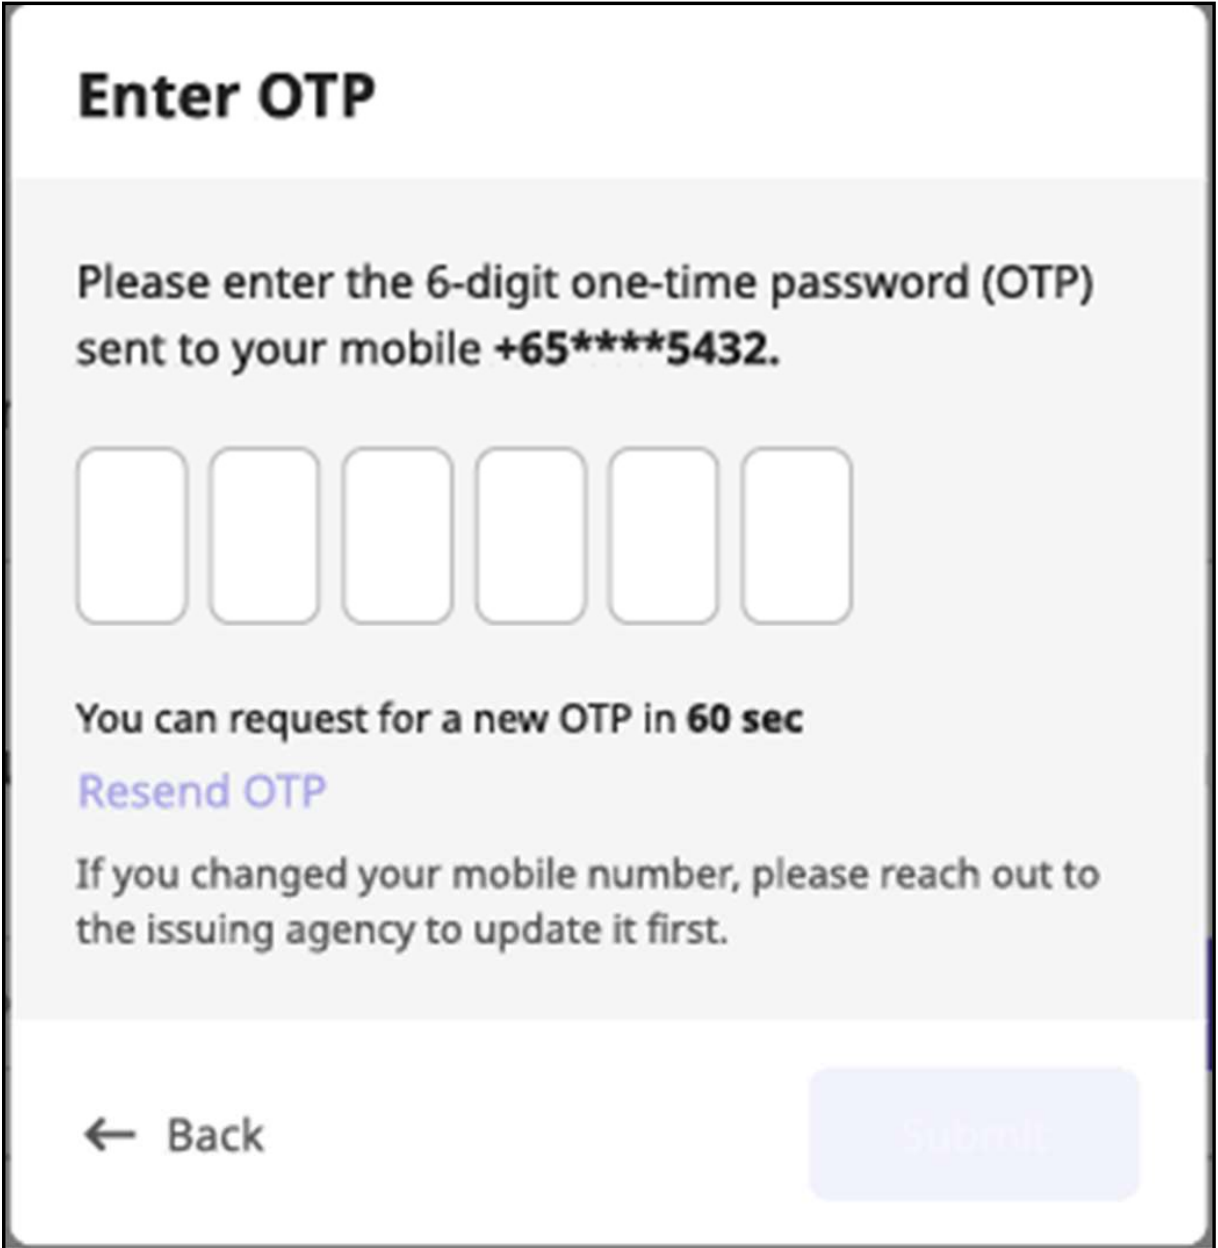 Type in the one-time password (OTP)